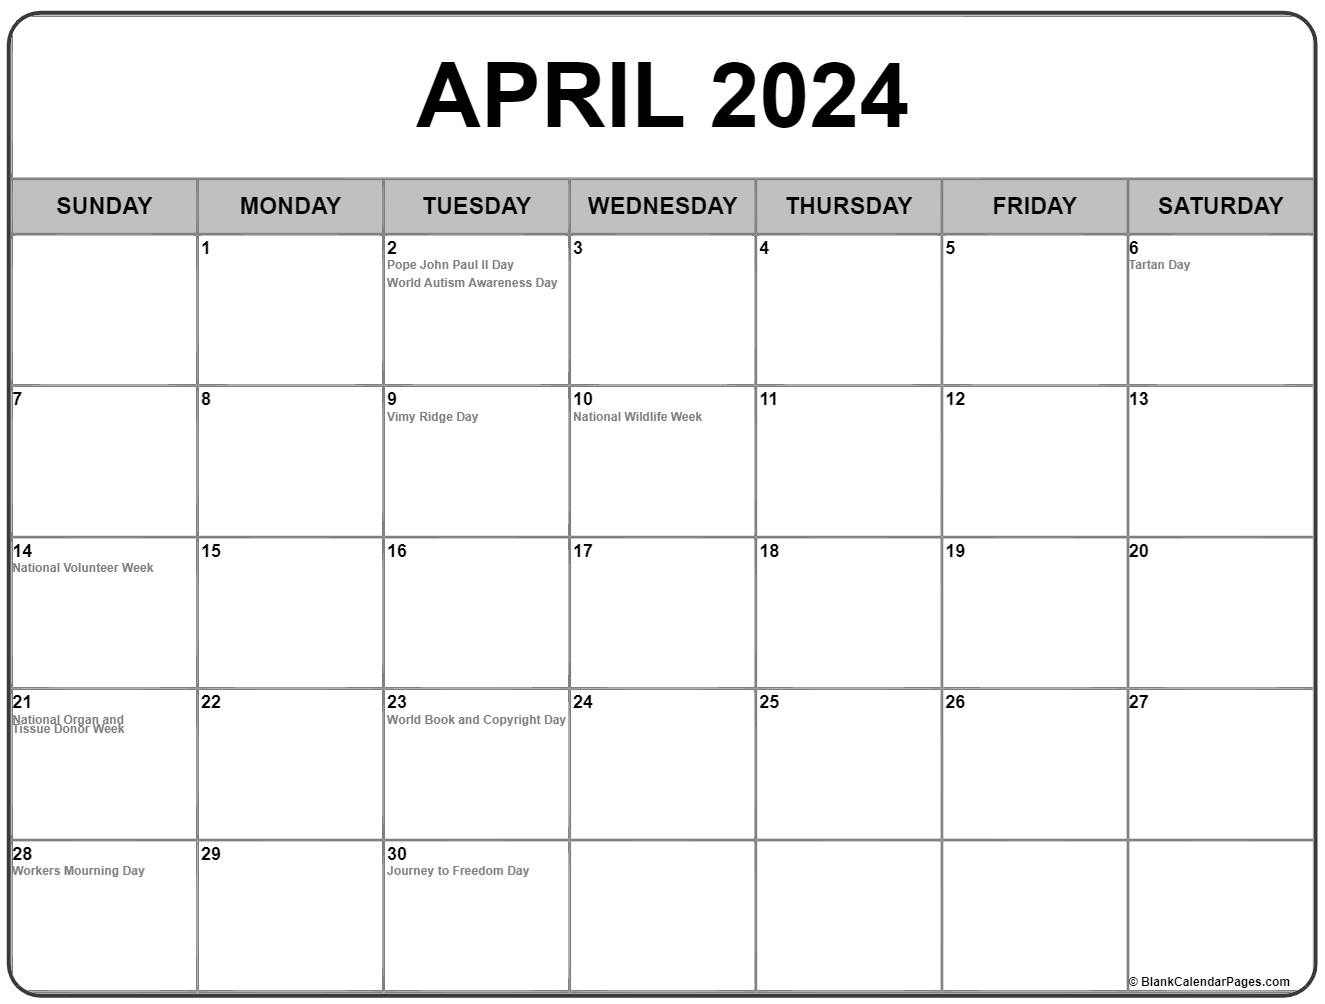 calendar for march and april 2021 with holidays April 2021 Calendar With Holidays calendar for march and april 2021 with holidays